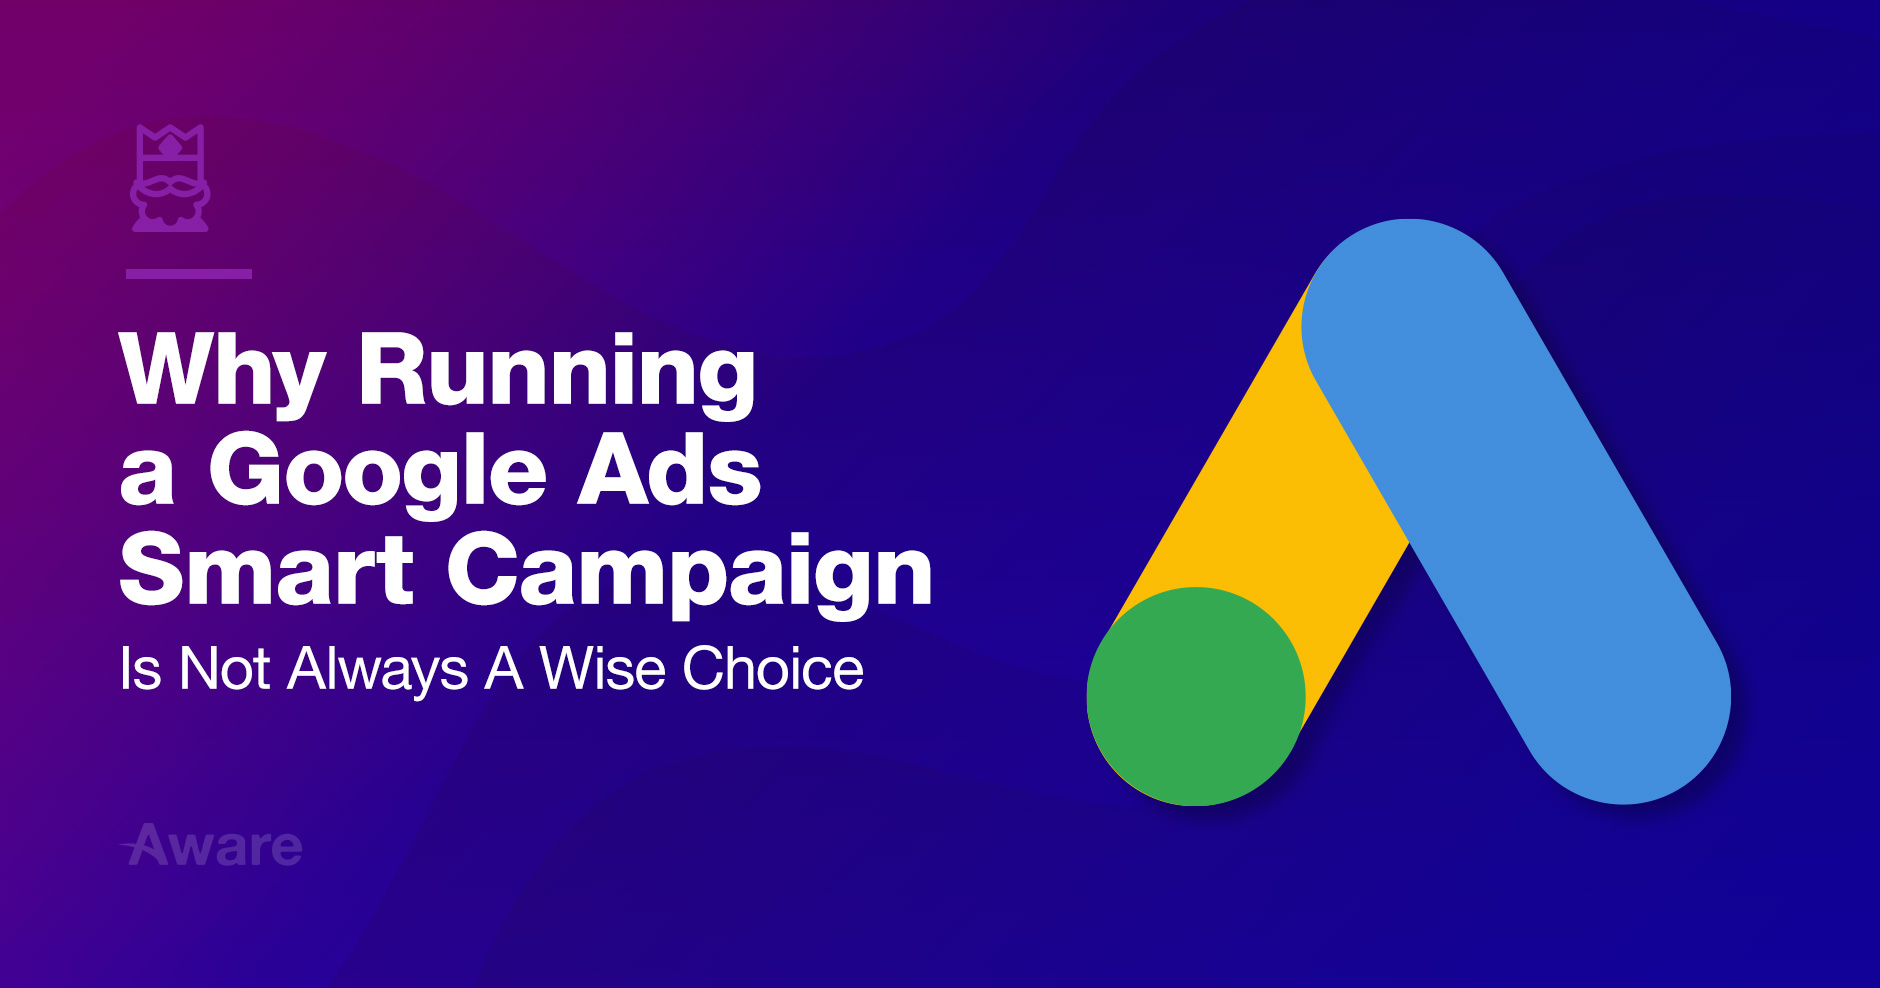 Why Running a Google Ads Smart Campaign Is Not Always A Wise Choice